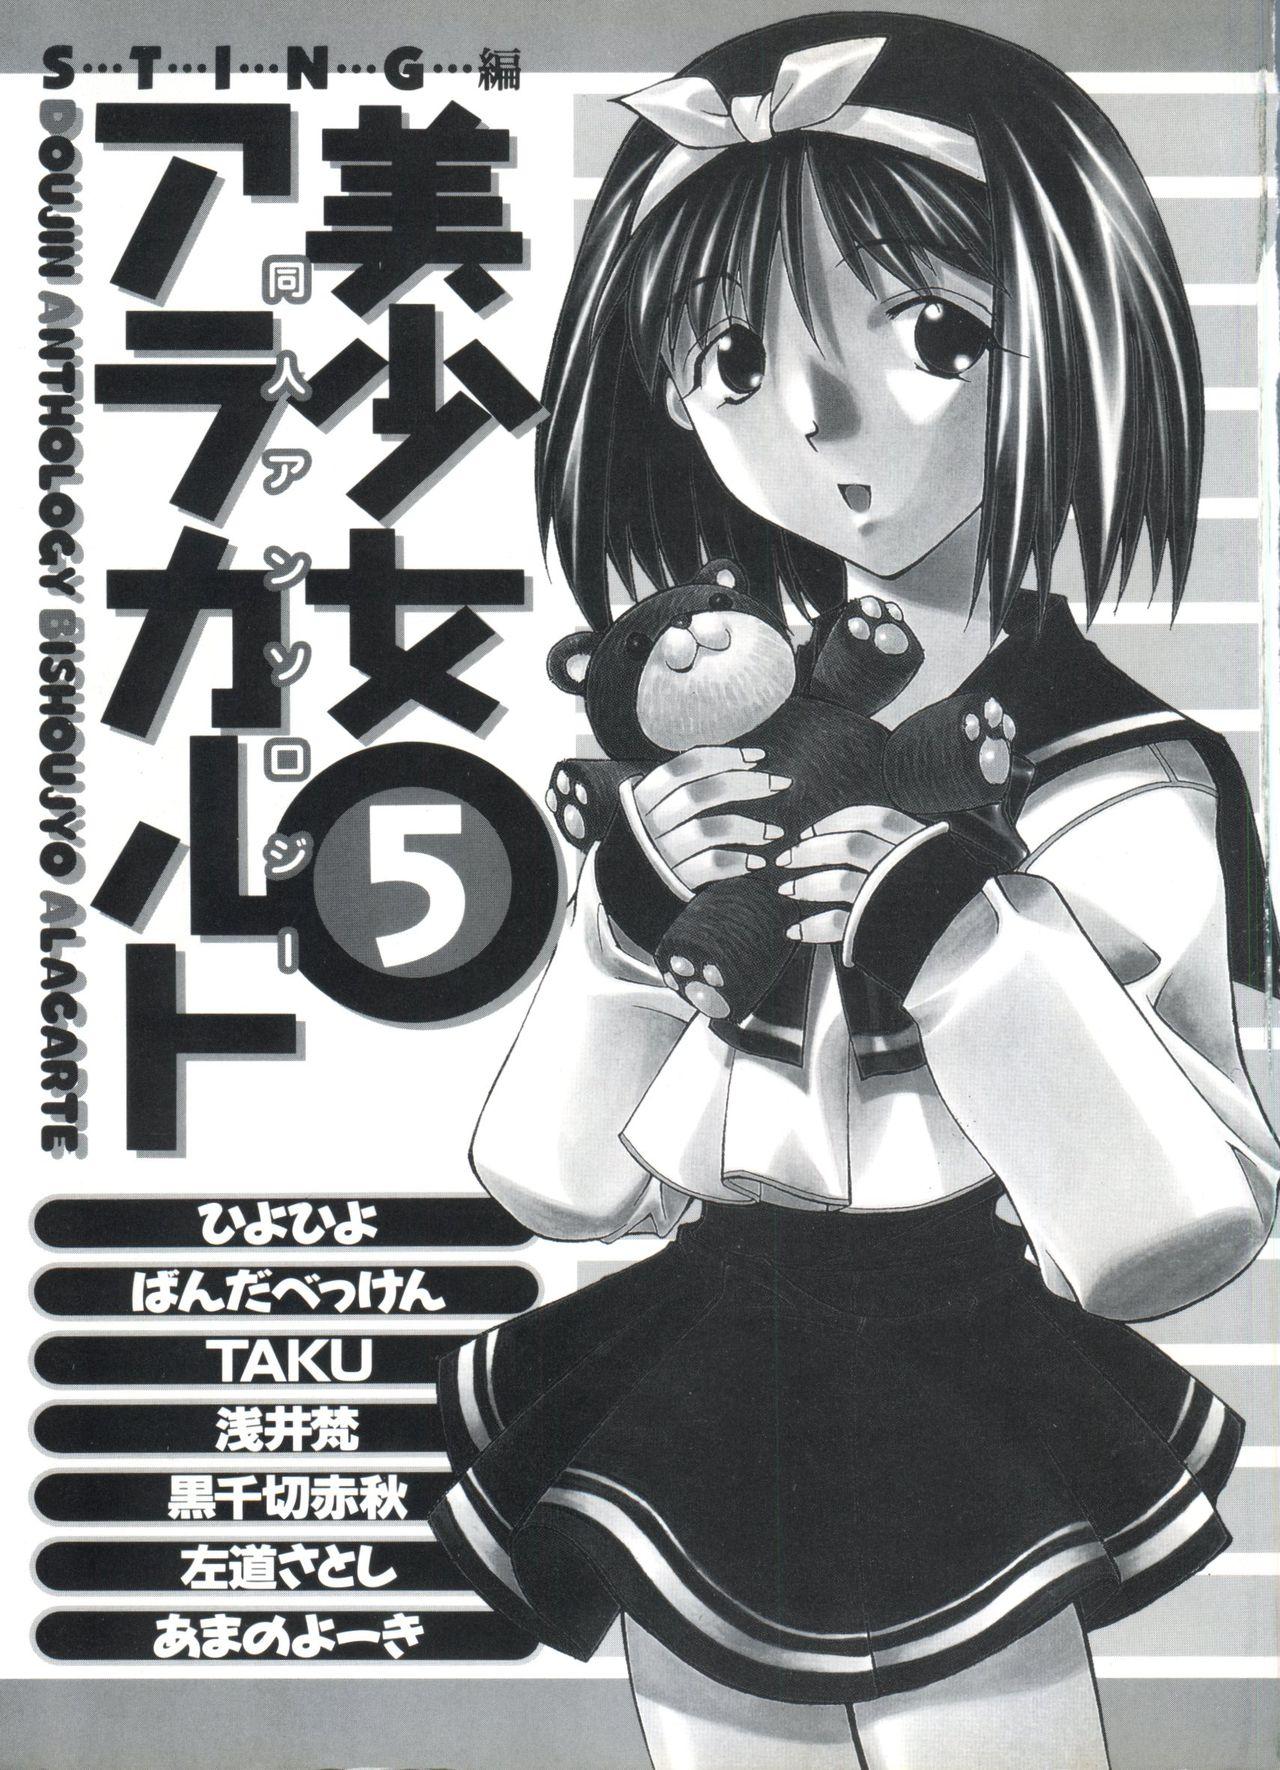 Rough Fucking Doujin Anthology Bishoujo a La Carte 5 - Neon genesis evangelion To heart Tenchi muyo Battle athletes The vision of escaflowne Twinbee Graduation Squirt - Page 4